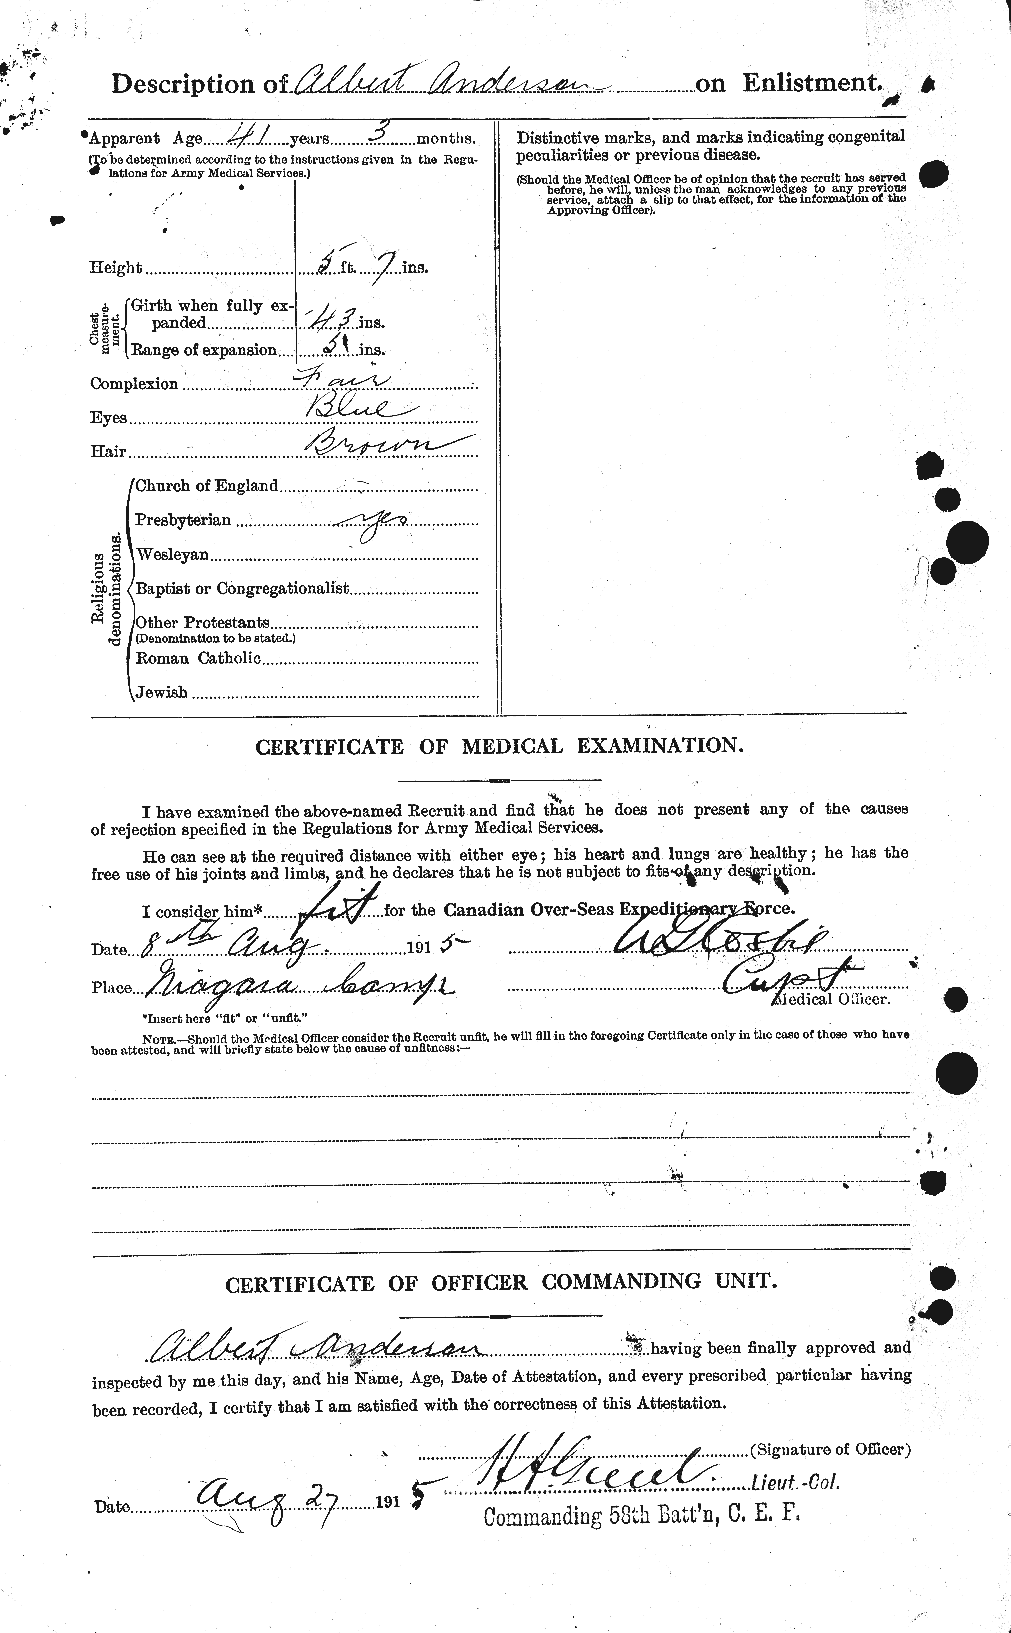 Personnel Records of the First World War - CEF 209563b